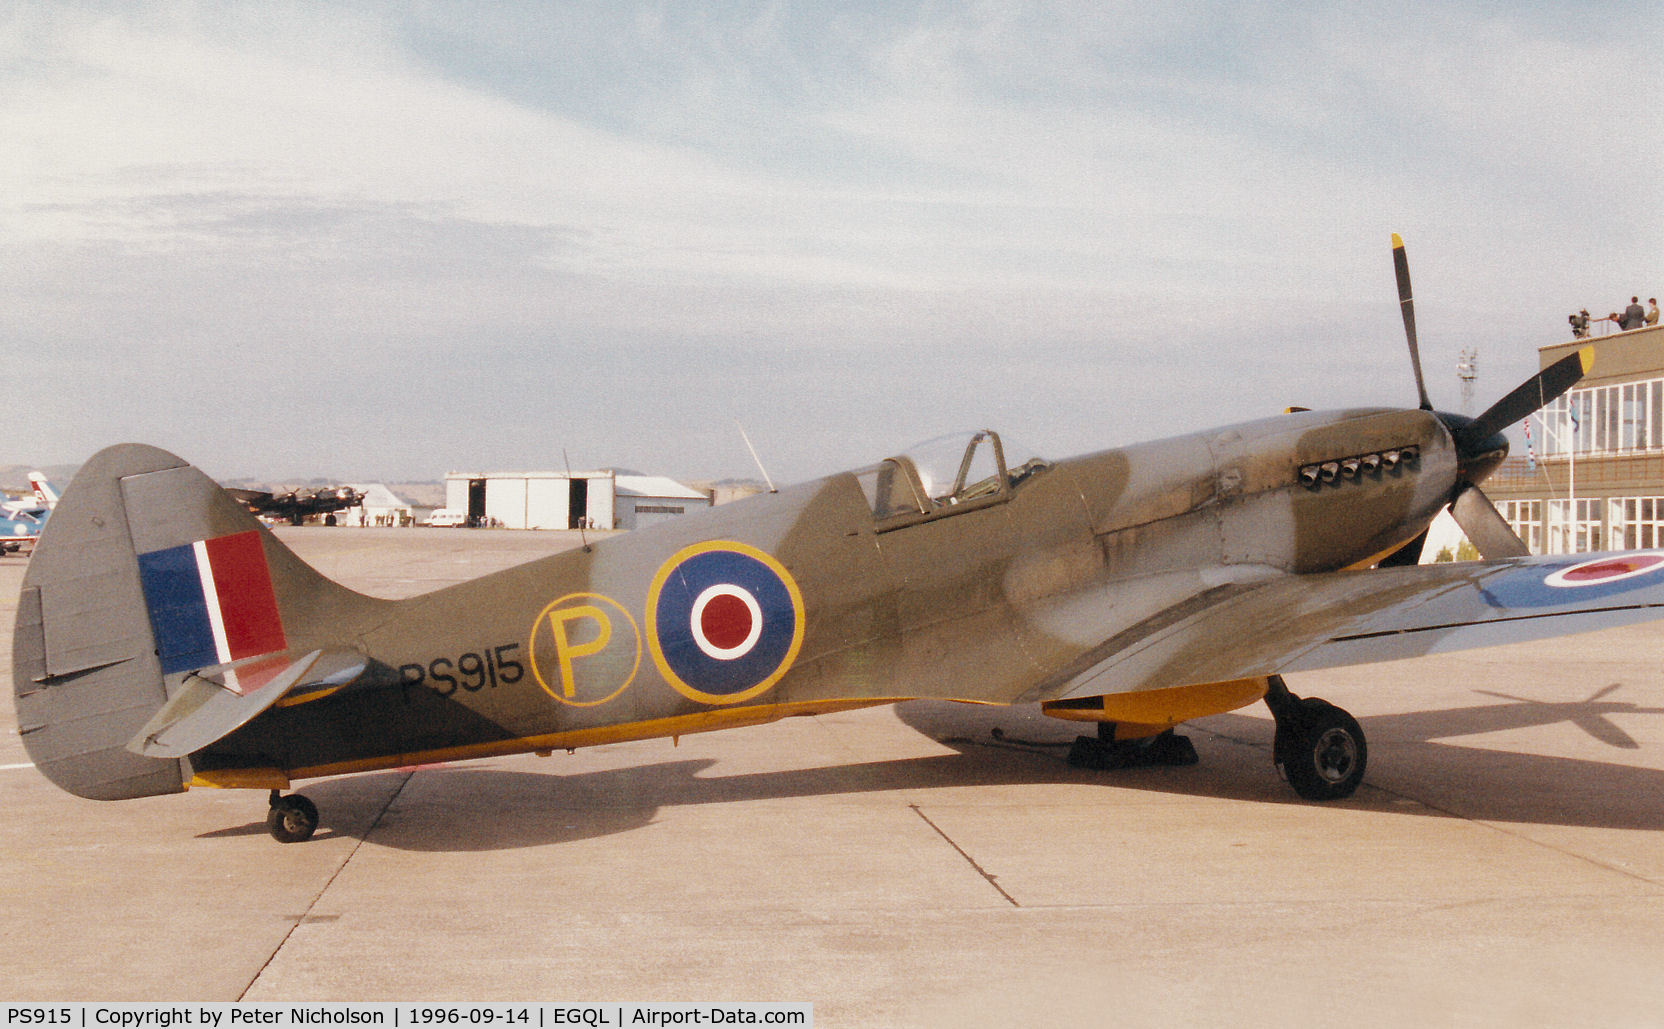 PS915, 1945 Supermarine 389 Spitfire PR.XIX C/N 6S/585121, Spitfire PR.XIX of the RAF Battle of Britian Memorial Flight based at RAF Coningsby on display at the 1996 RAF Leuchars Airshow.